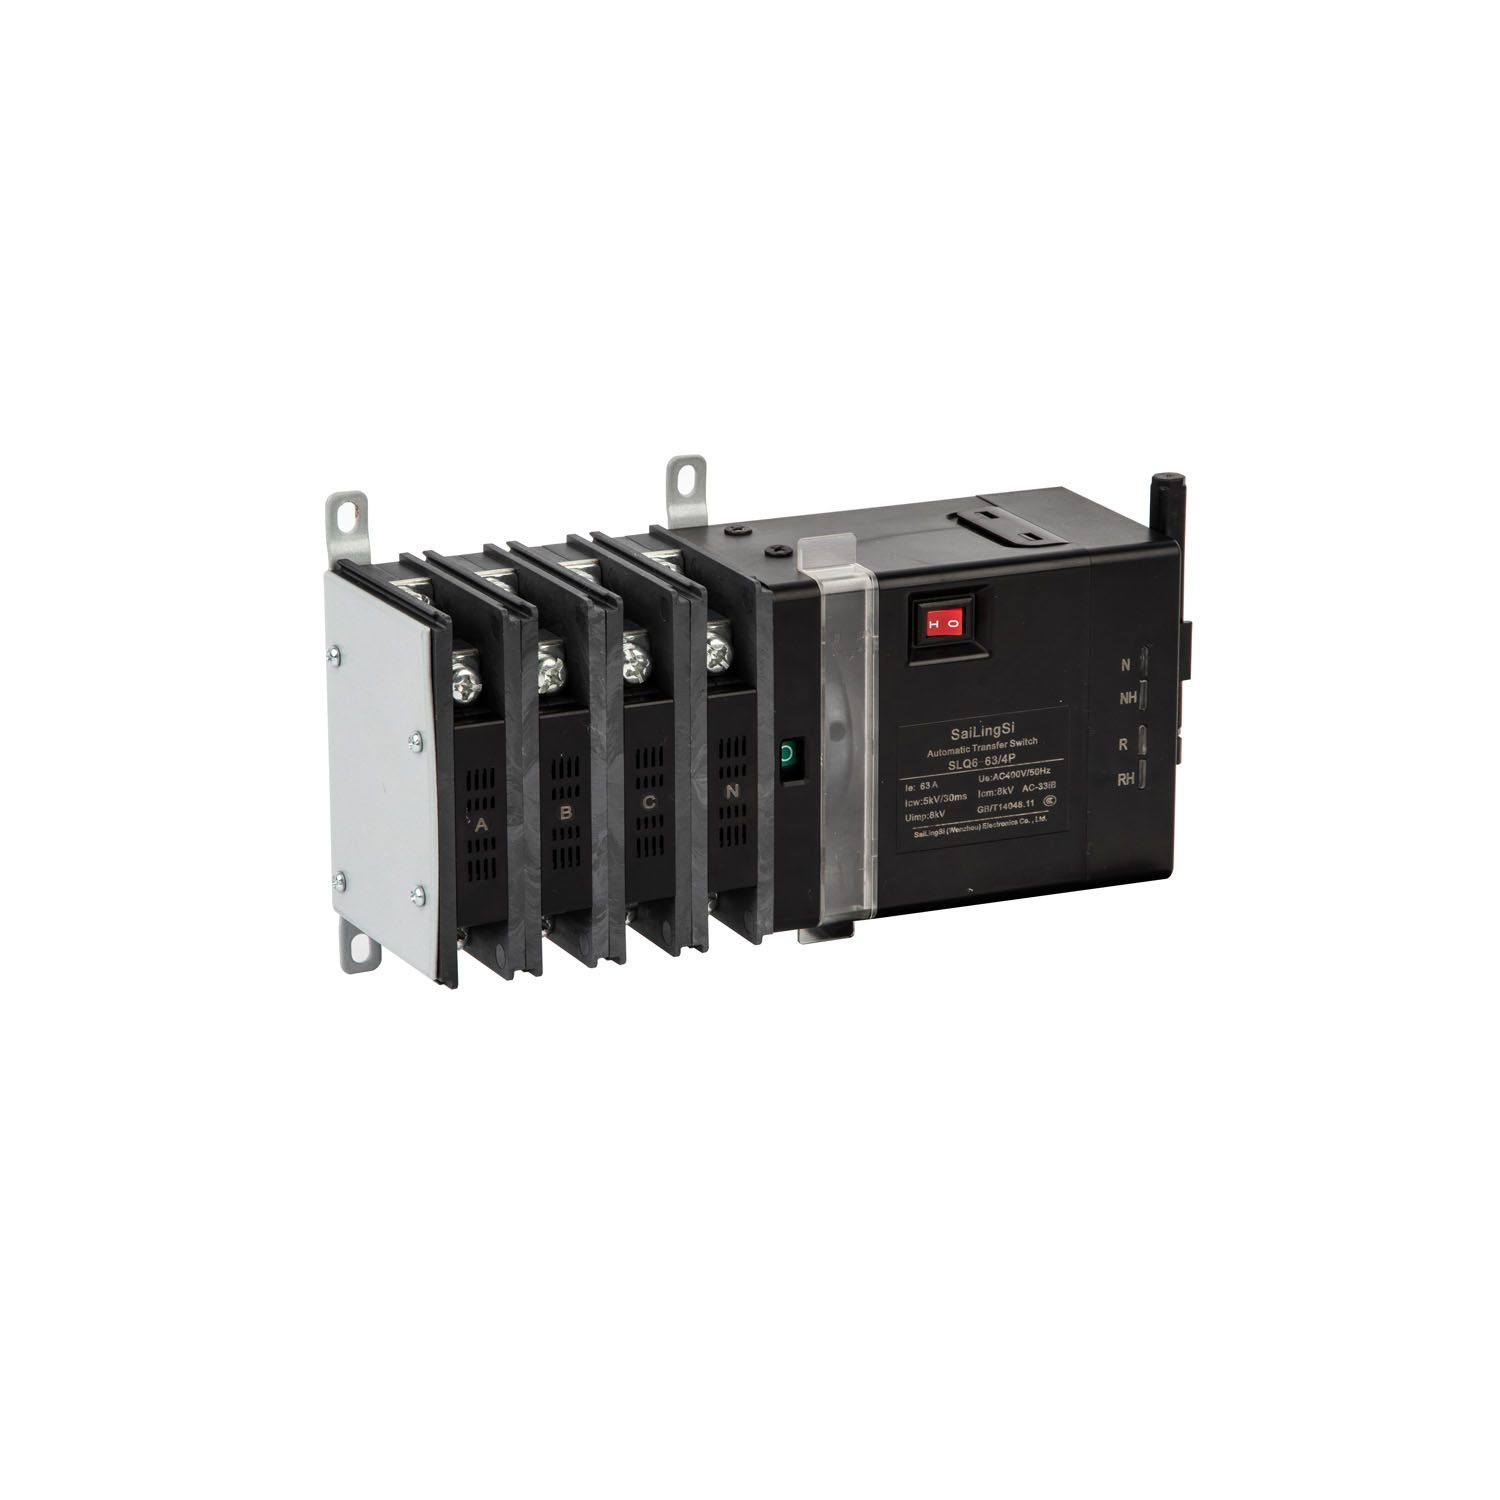 Solar Power to City Power ATS 250A 4p Automatic Transfer Switch ATS with Fire Control